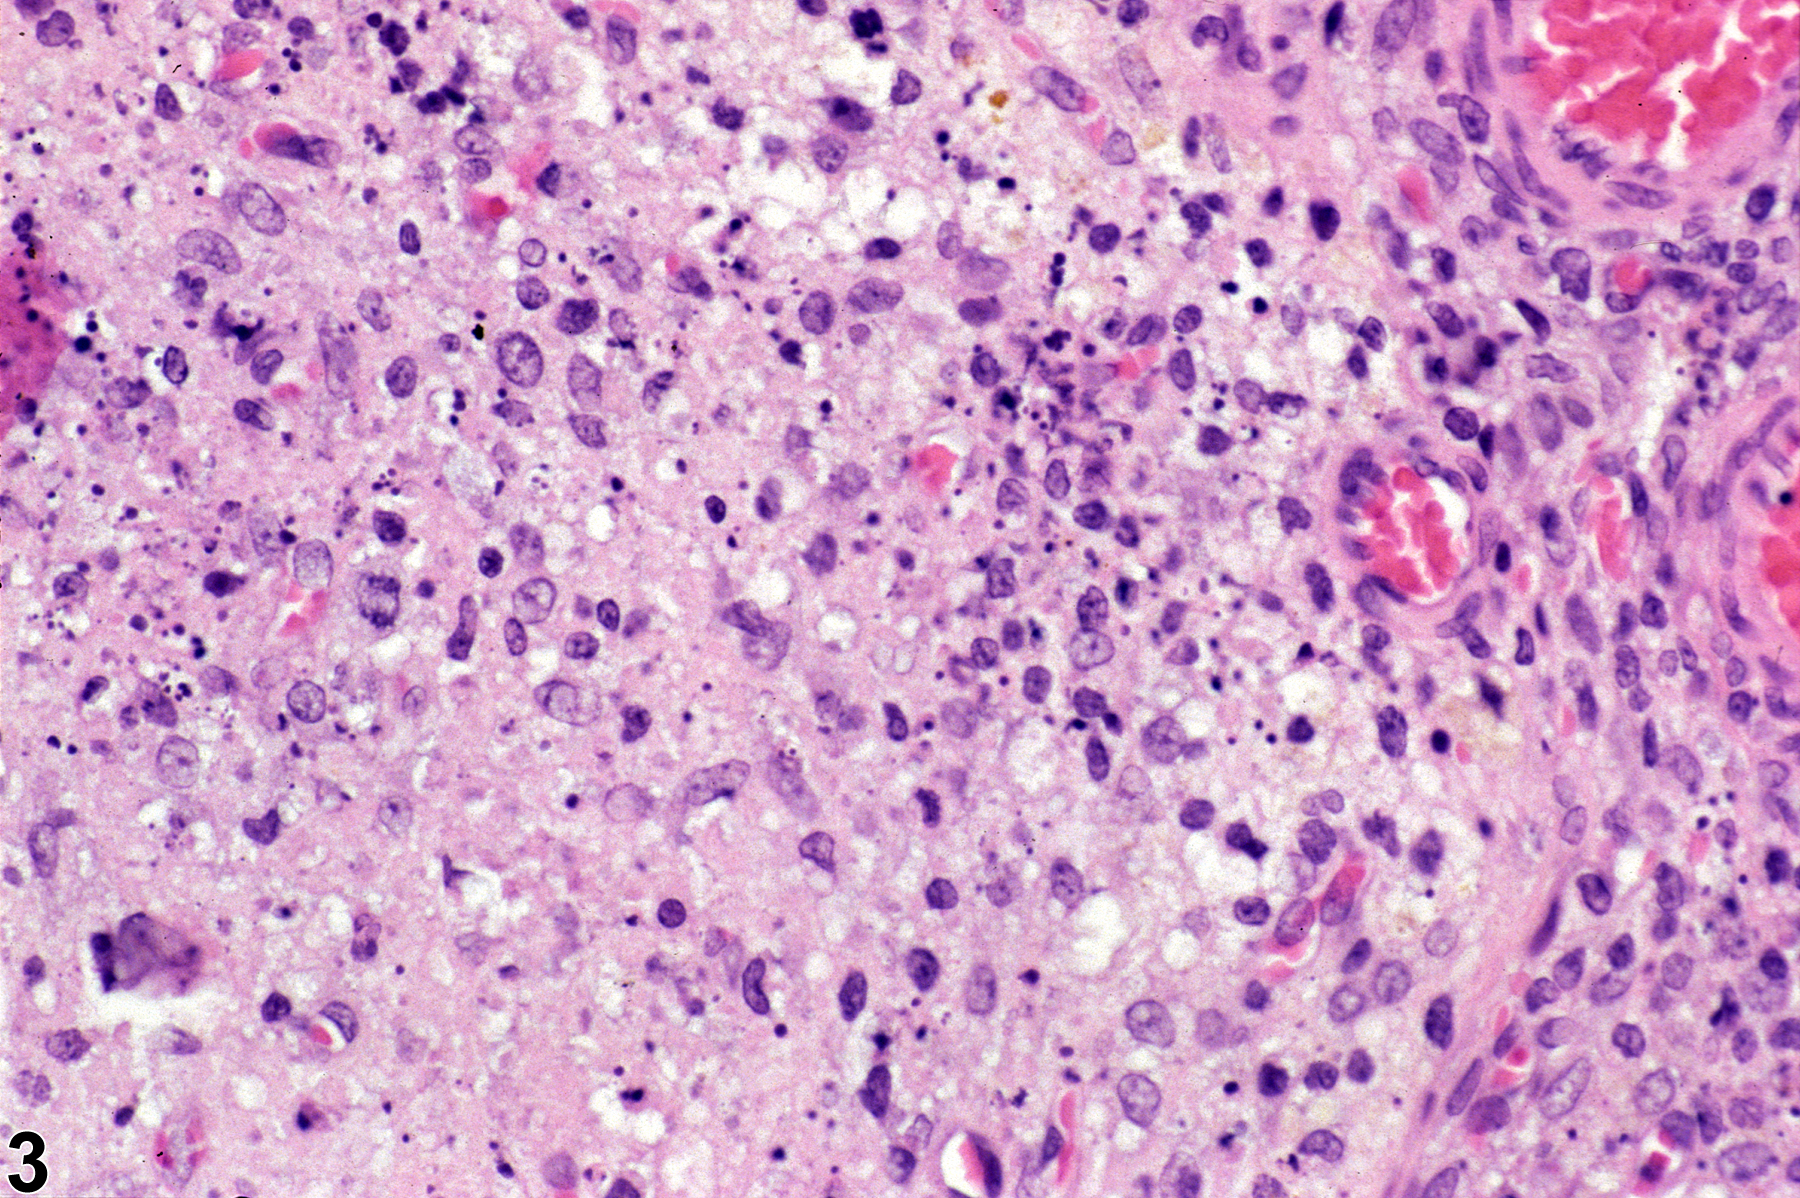 Image of necrosis in the ovary from a female F344/N rat in a chronic study